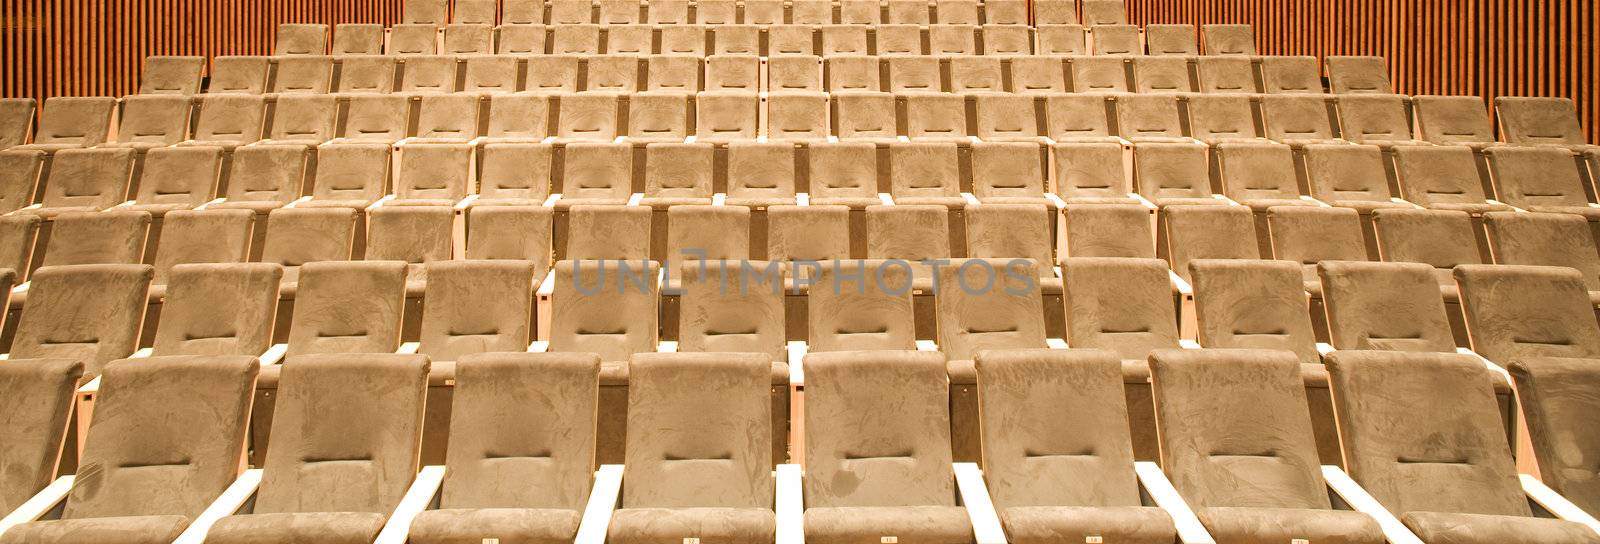 Empty seats in a row in a university hall